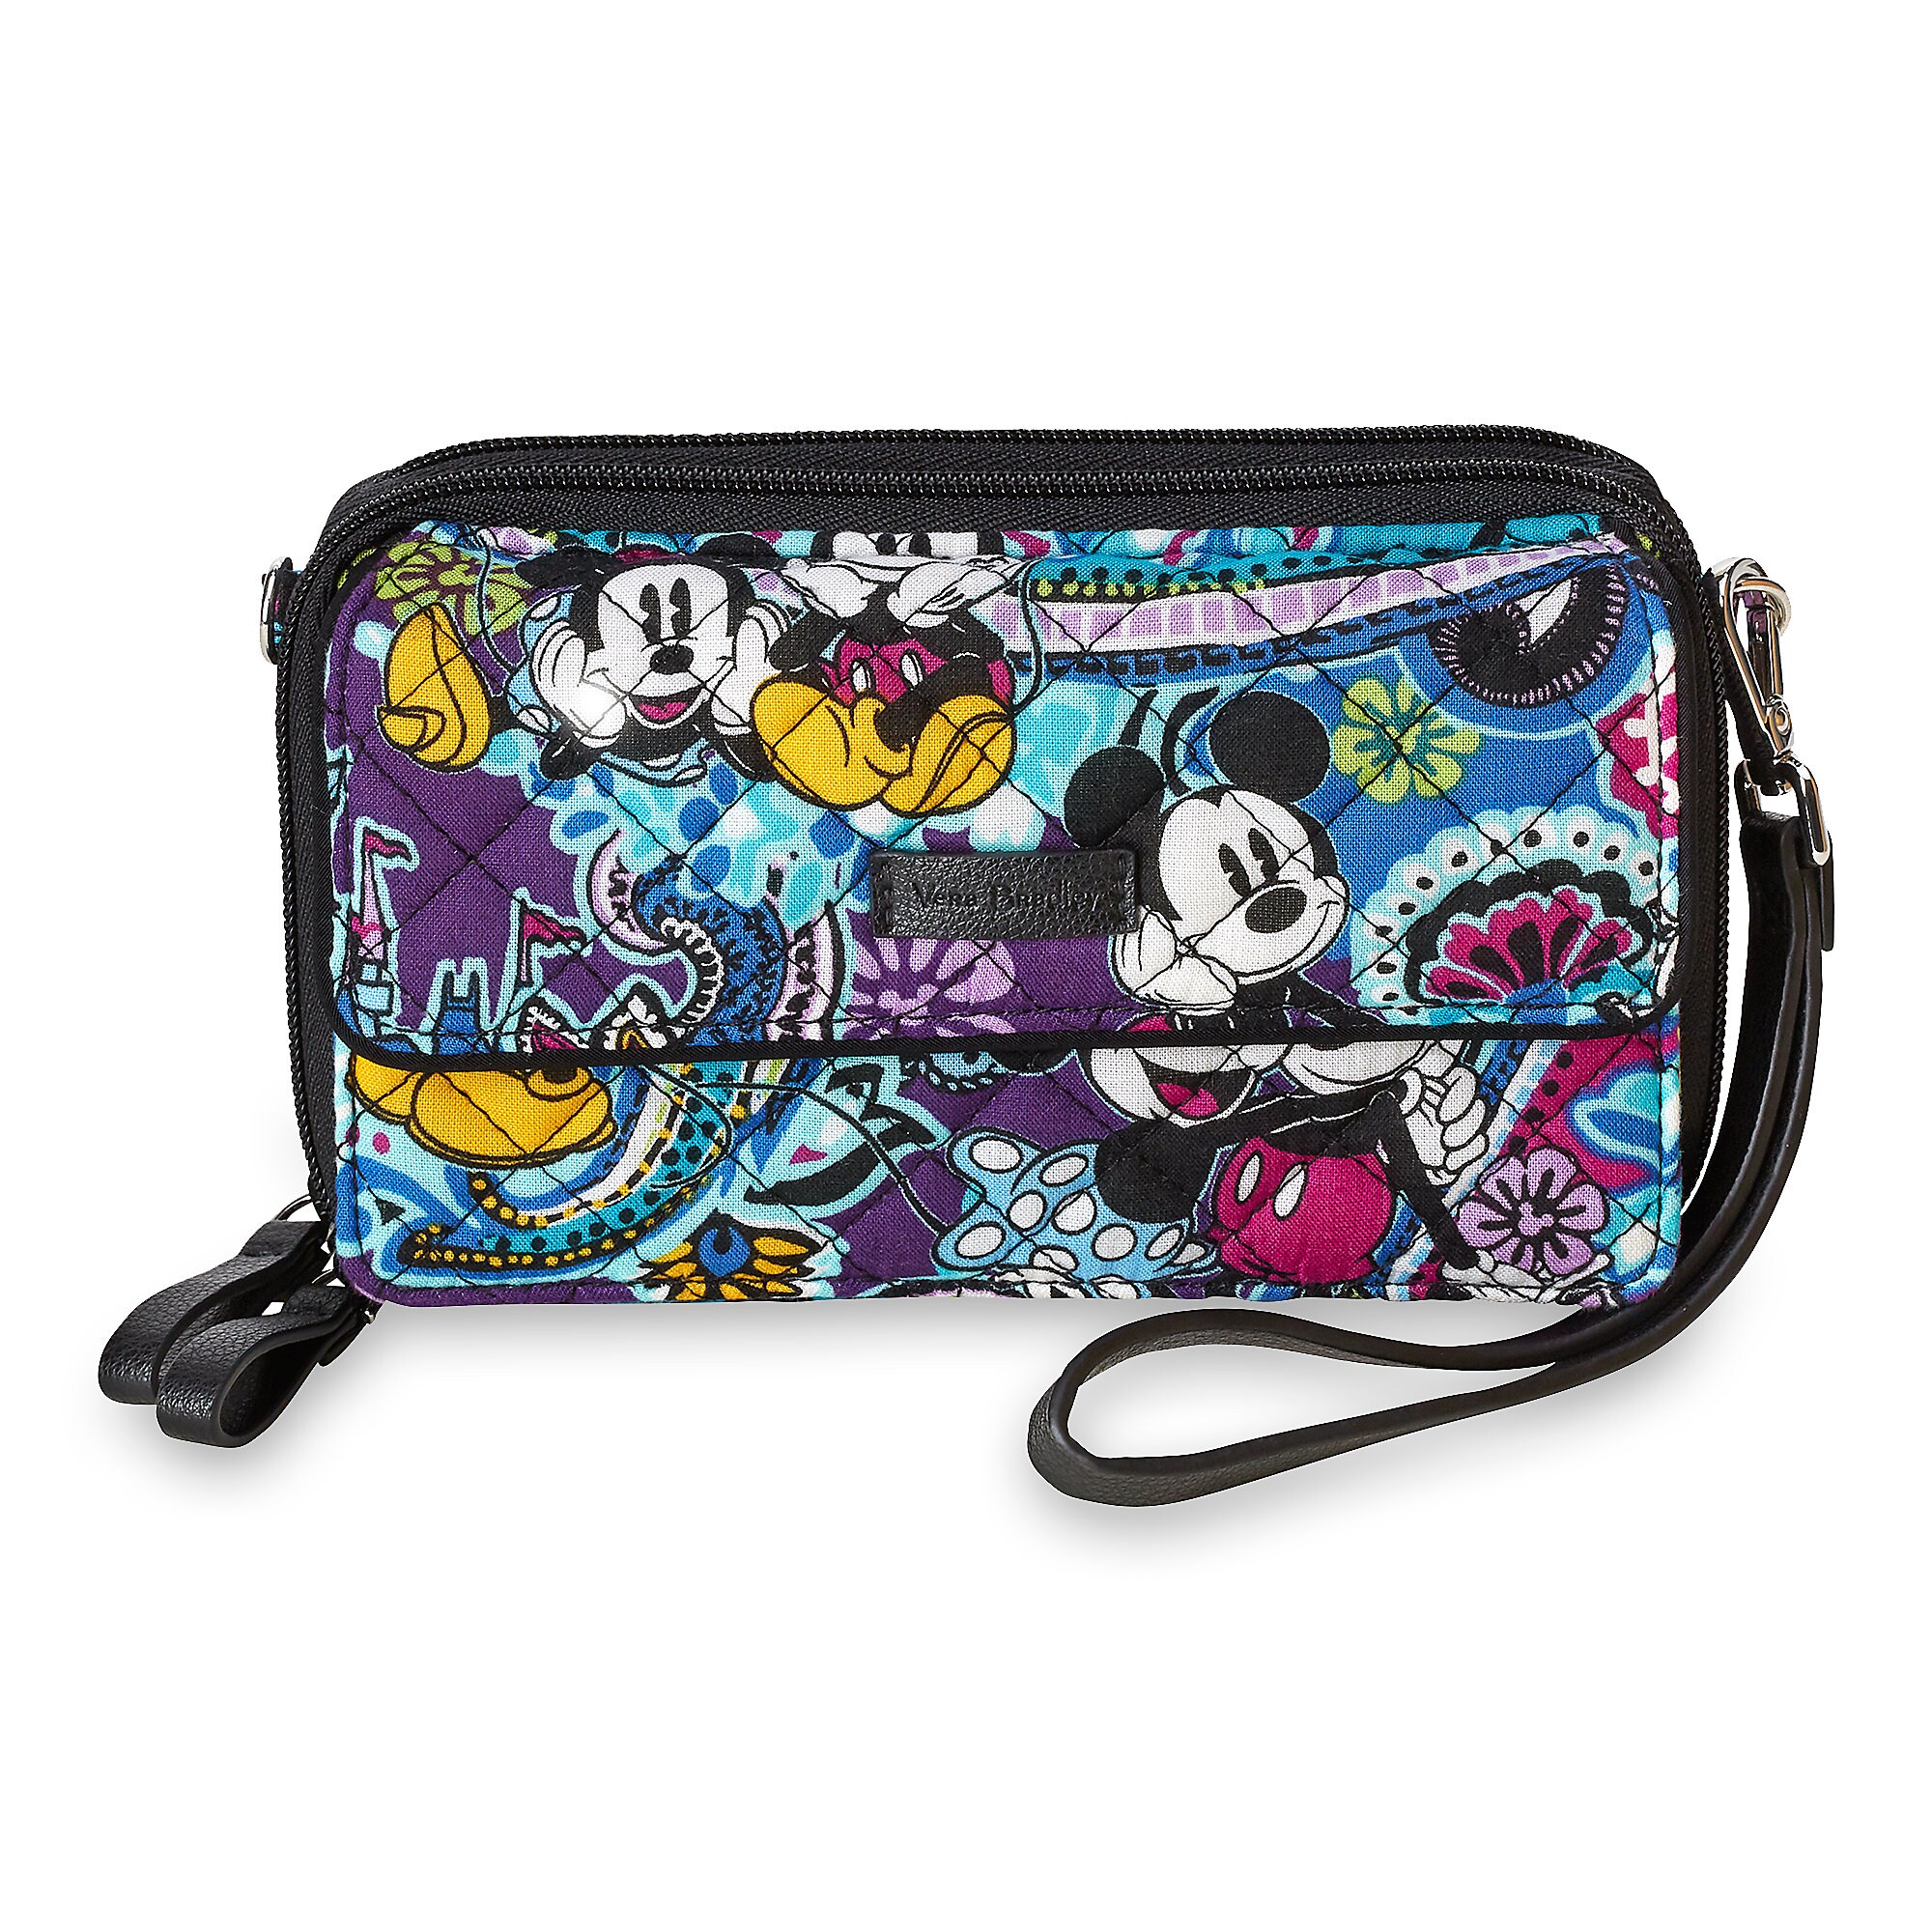 Mickey and Minnie Mouse Paisley All in One Crossbody and Wristlet by Vera Bradley